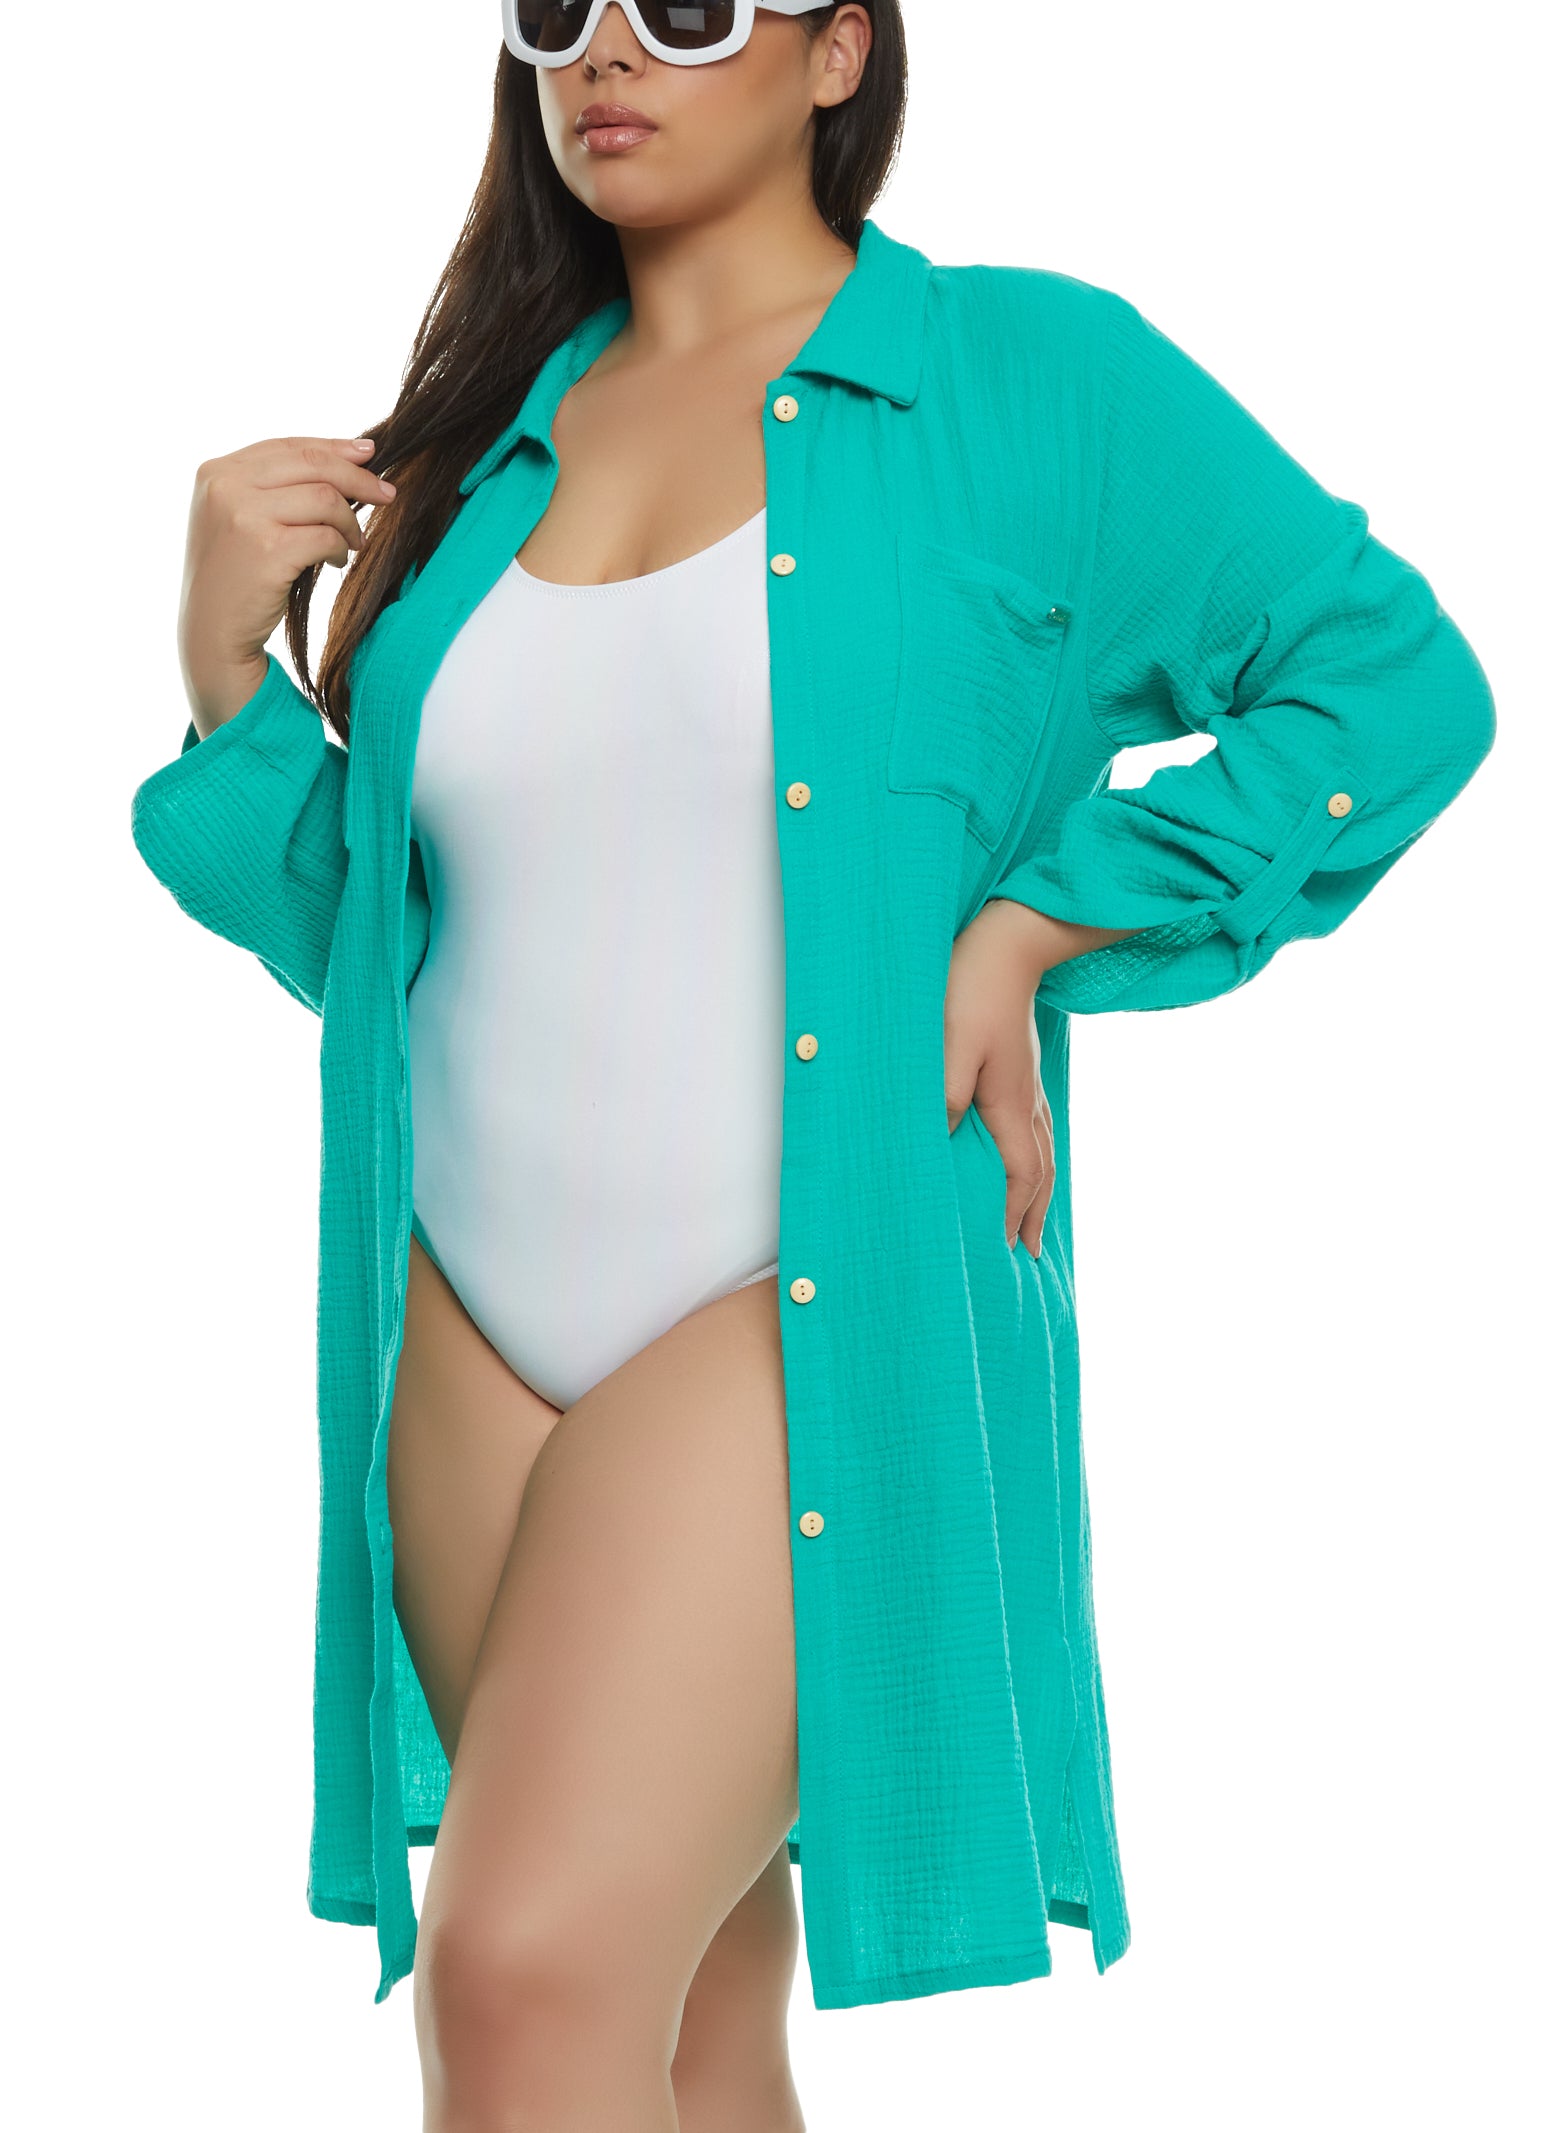 Womens Plus Swimsuit Cover-ups in Womens Plus Swimsuits 